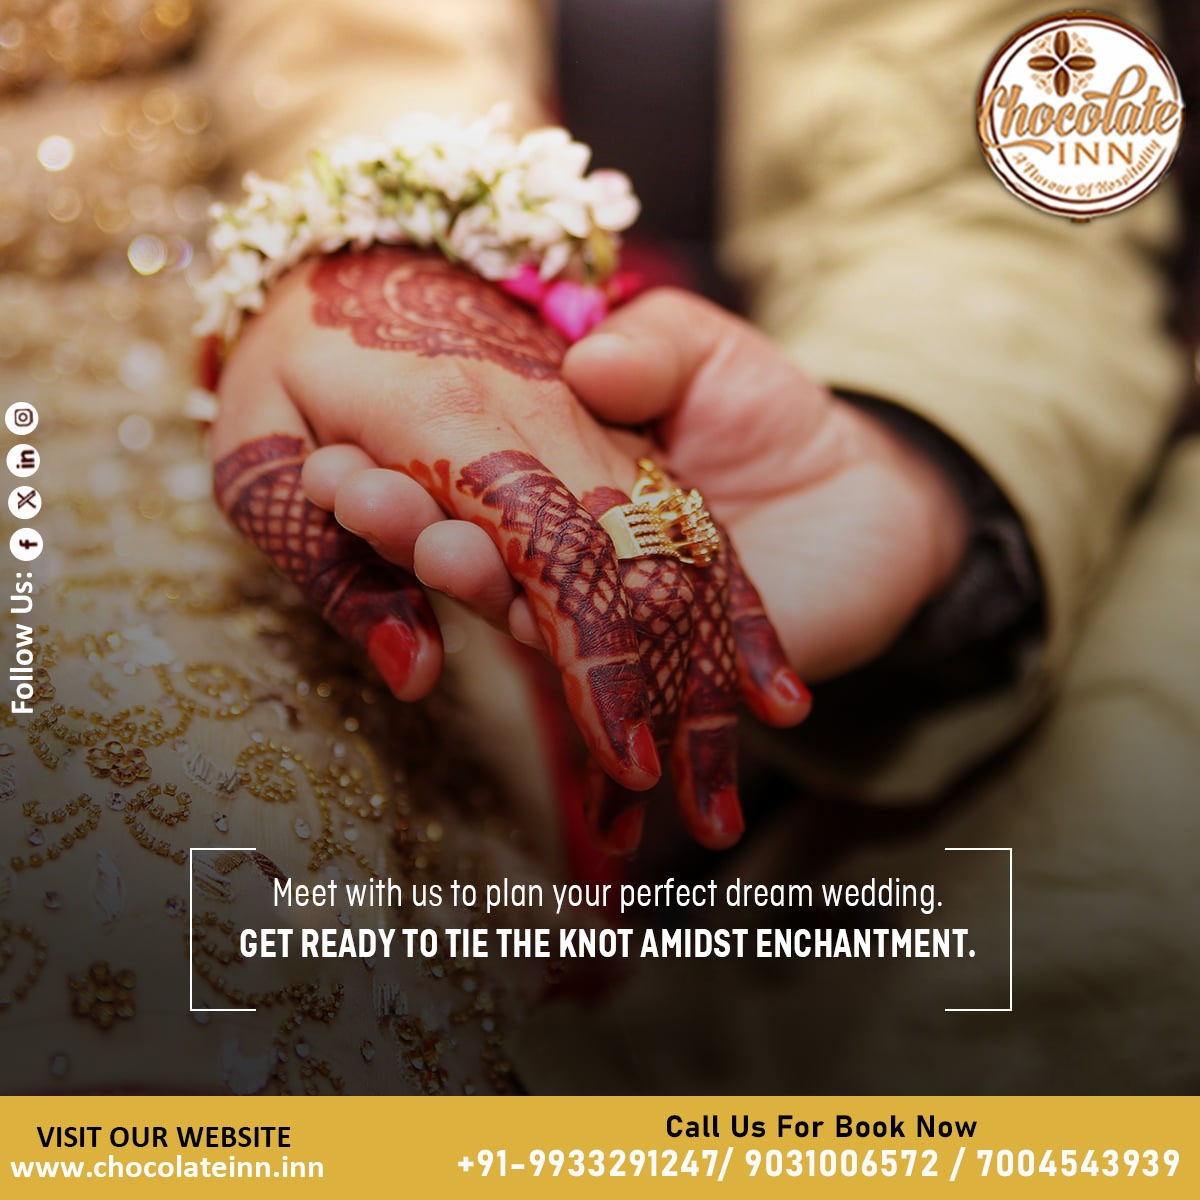 Get ready to tie the knot amidst enchantment at our stunning venue. ✨
#DreamWedding #HappilyEverAfter   

Call us at  933291247
Visit us: chocolateinn.in   

#WeddingBliss #UnforgettableMoments #CherishedMemories  #Hotelchocolateinn #weddings #banquethall #Patna #Bihar